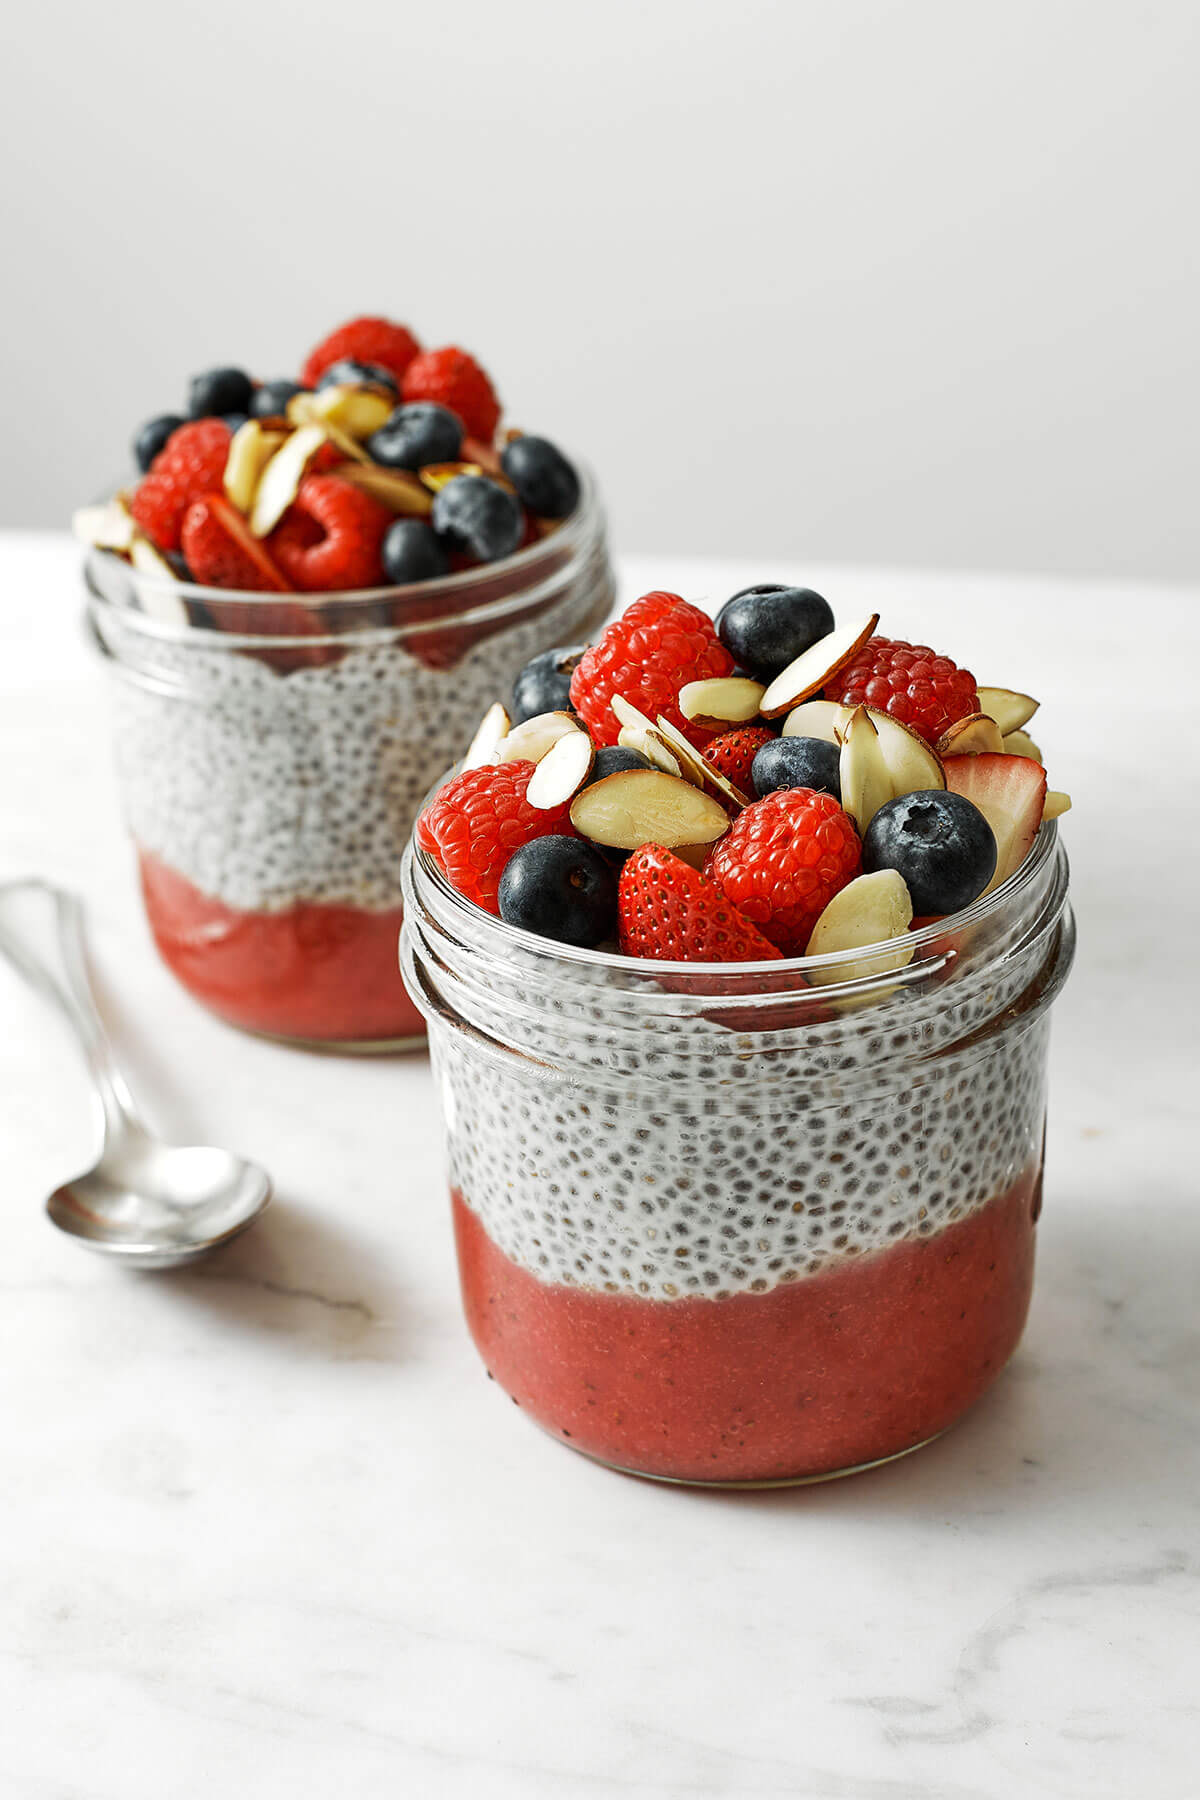 Two jars of chia pudding and fruits